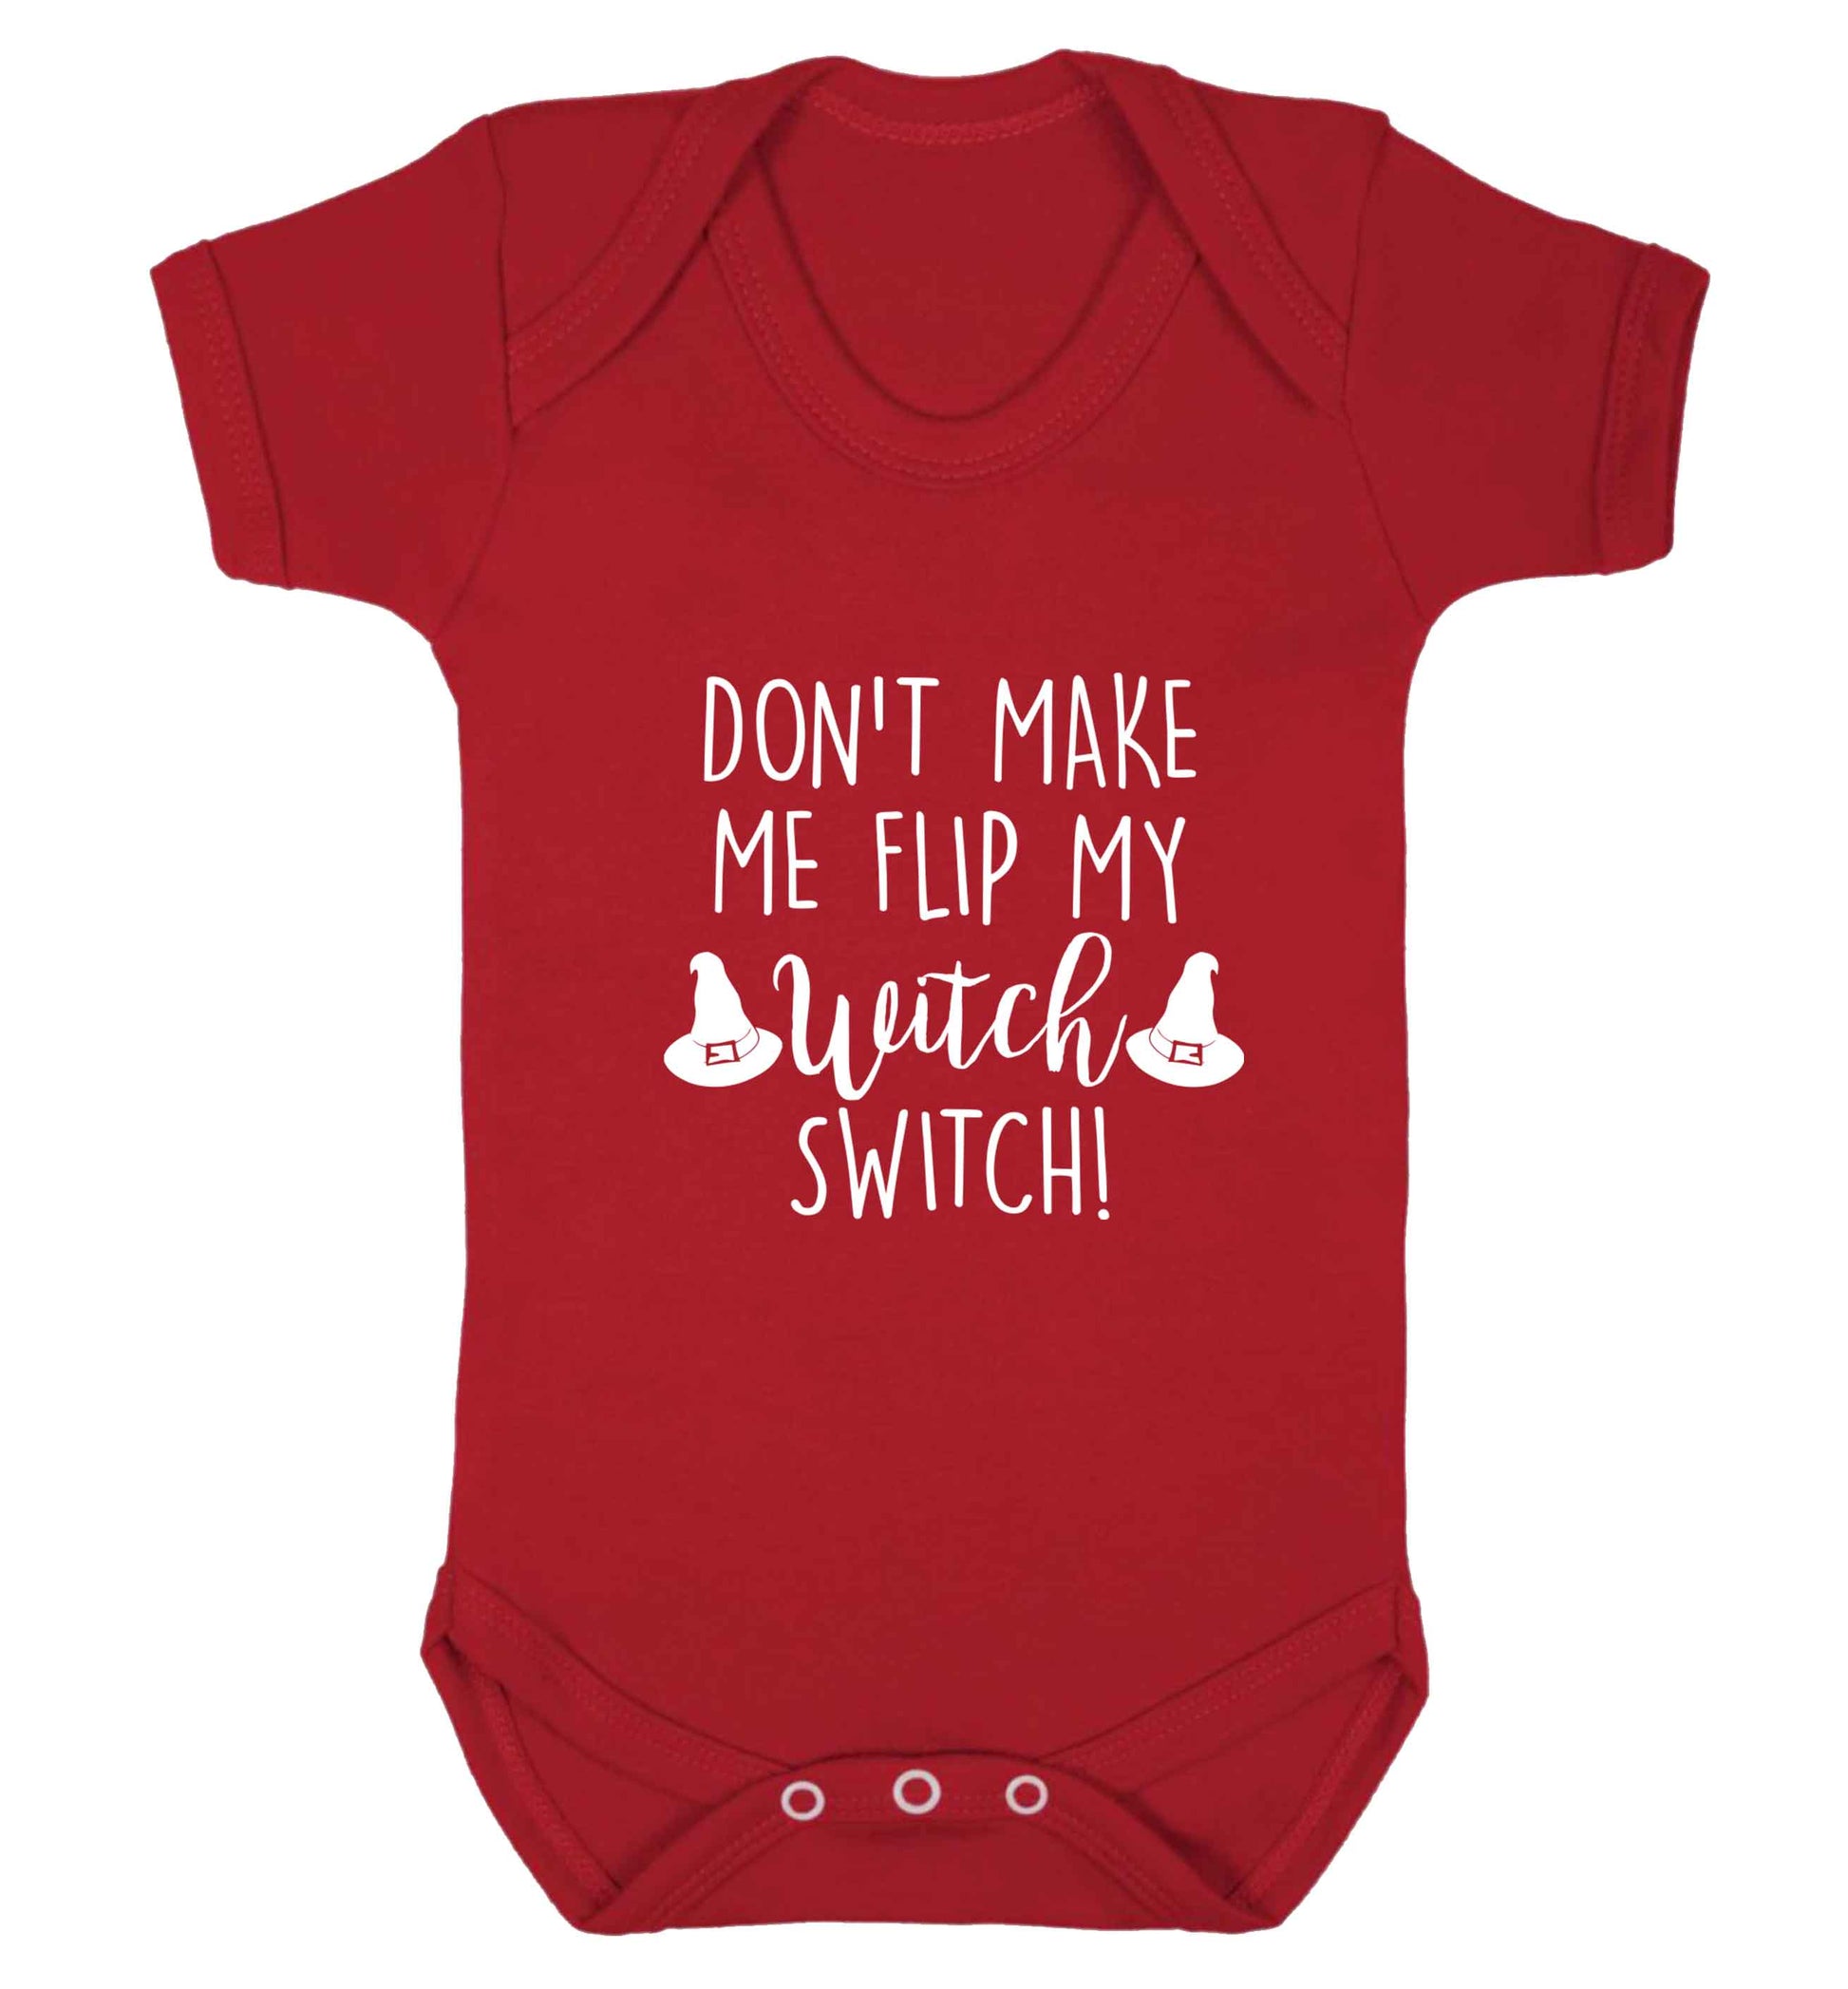 Don't make me flip my witch switch baby vest red 18-24 months